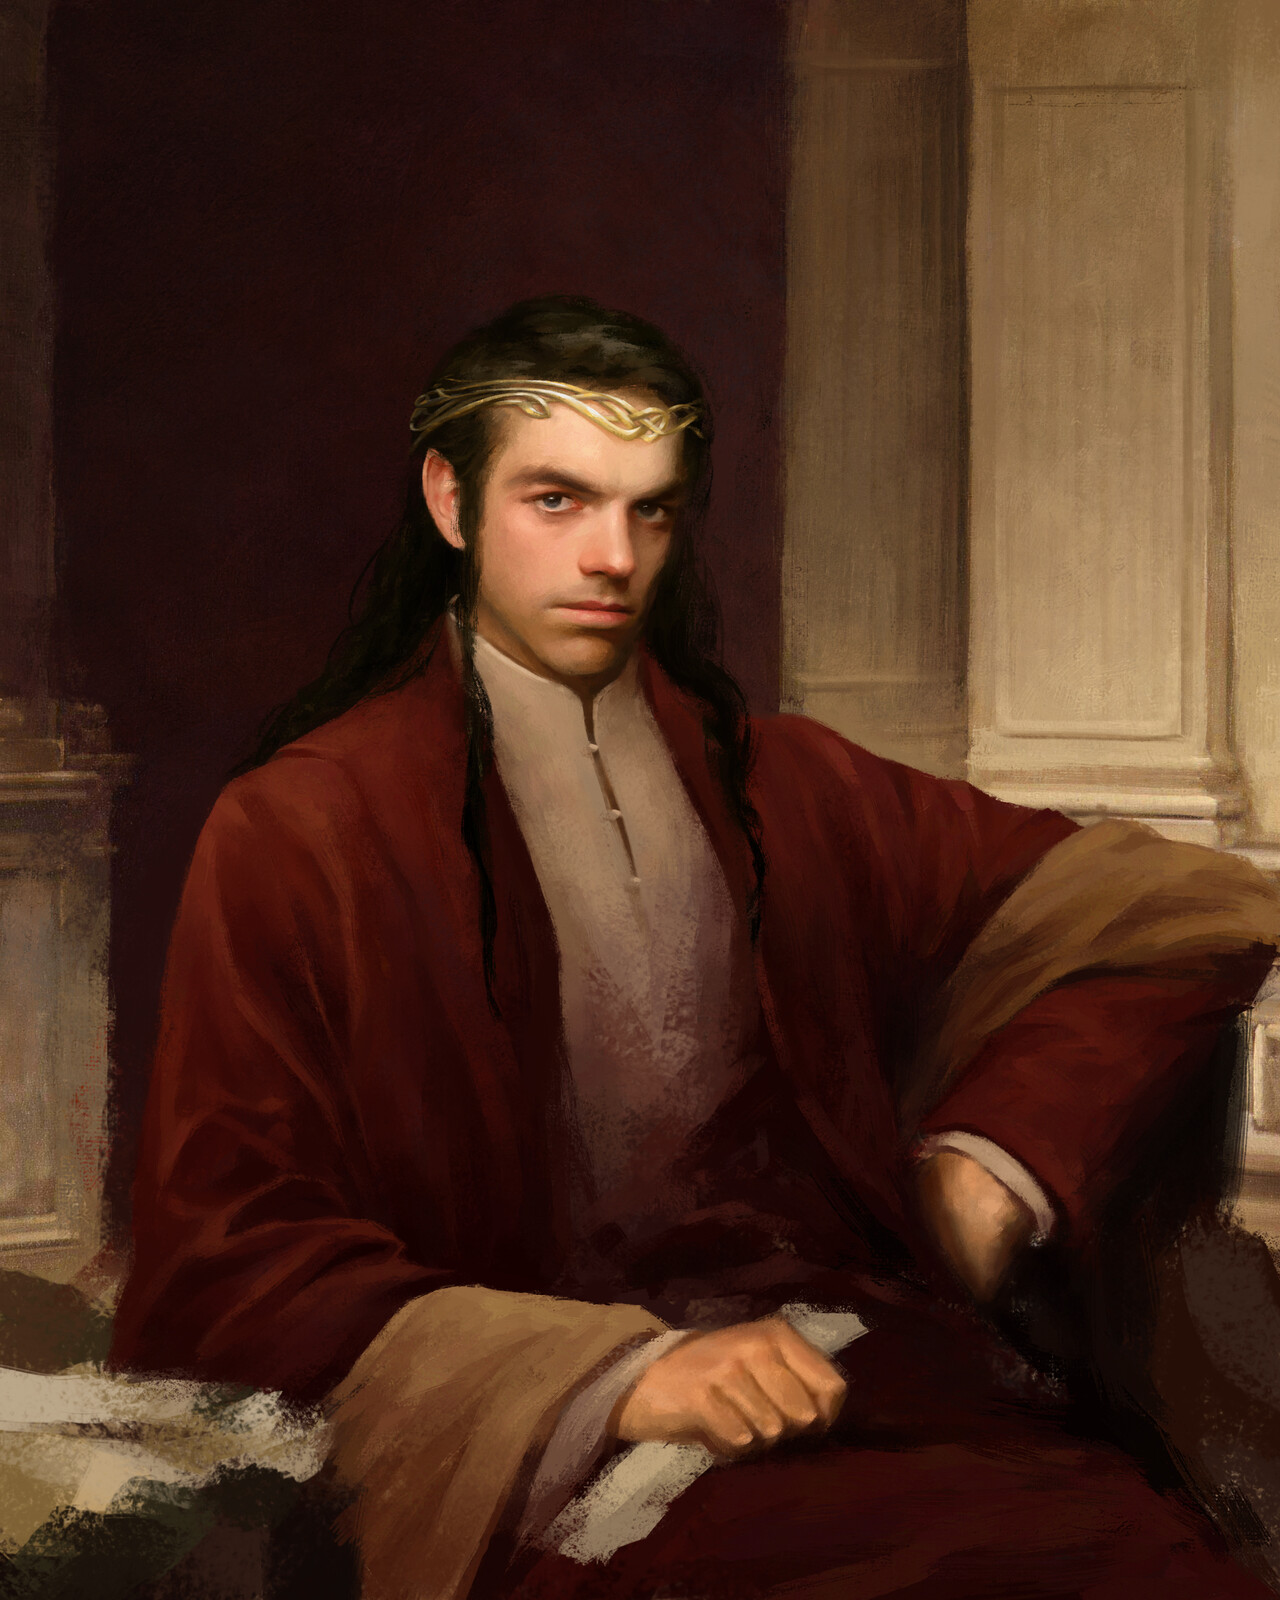 Portrait Fan Art commission- Lord Elrond from the movie LOTR